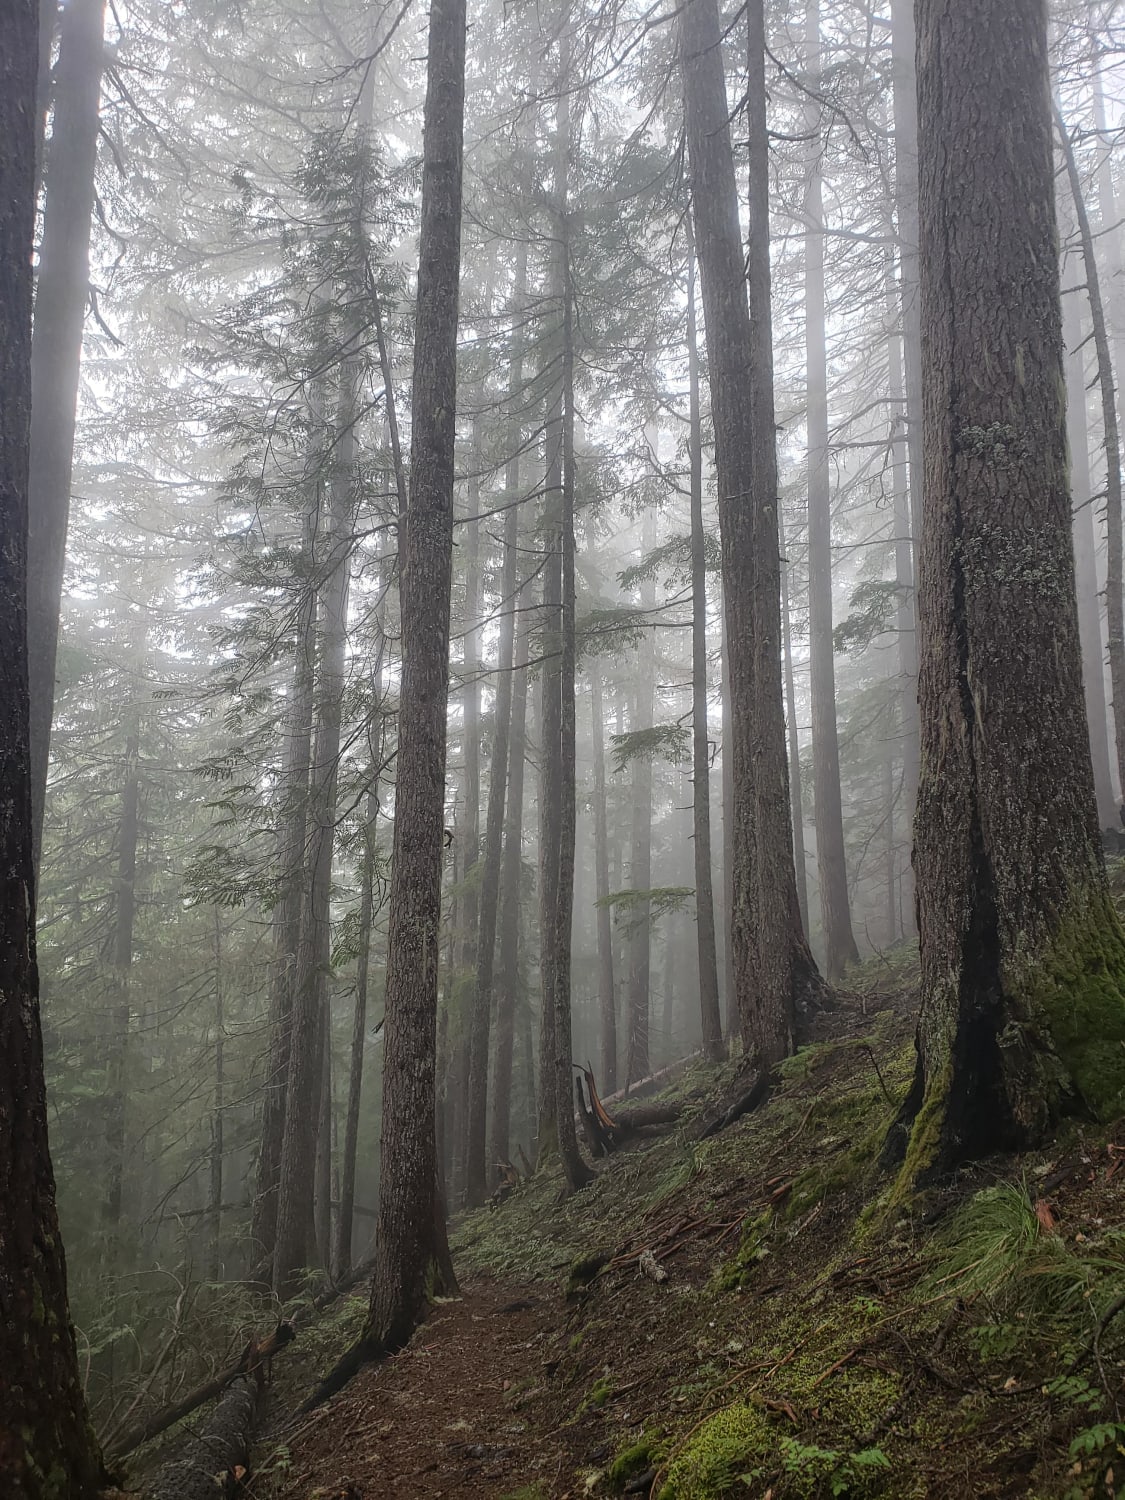 A quintessential Pacific Northwest scene. In the Mt. Baker-Snoqualmie National Forest. A day on the trail with no other person in sight and non-stop rain.